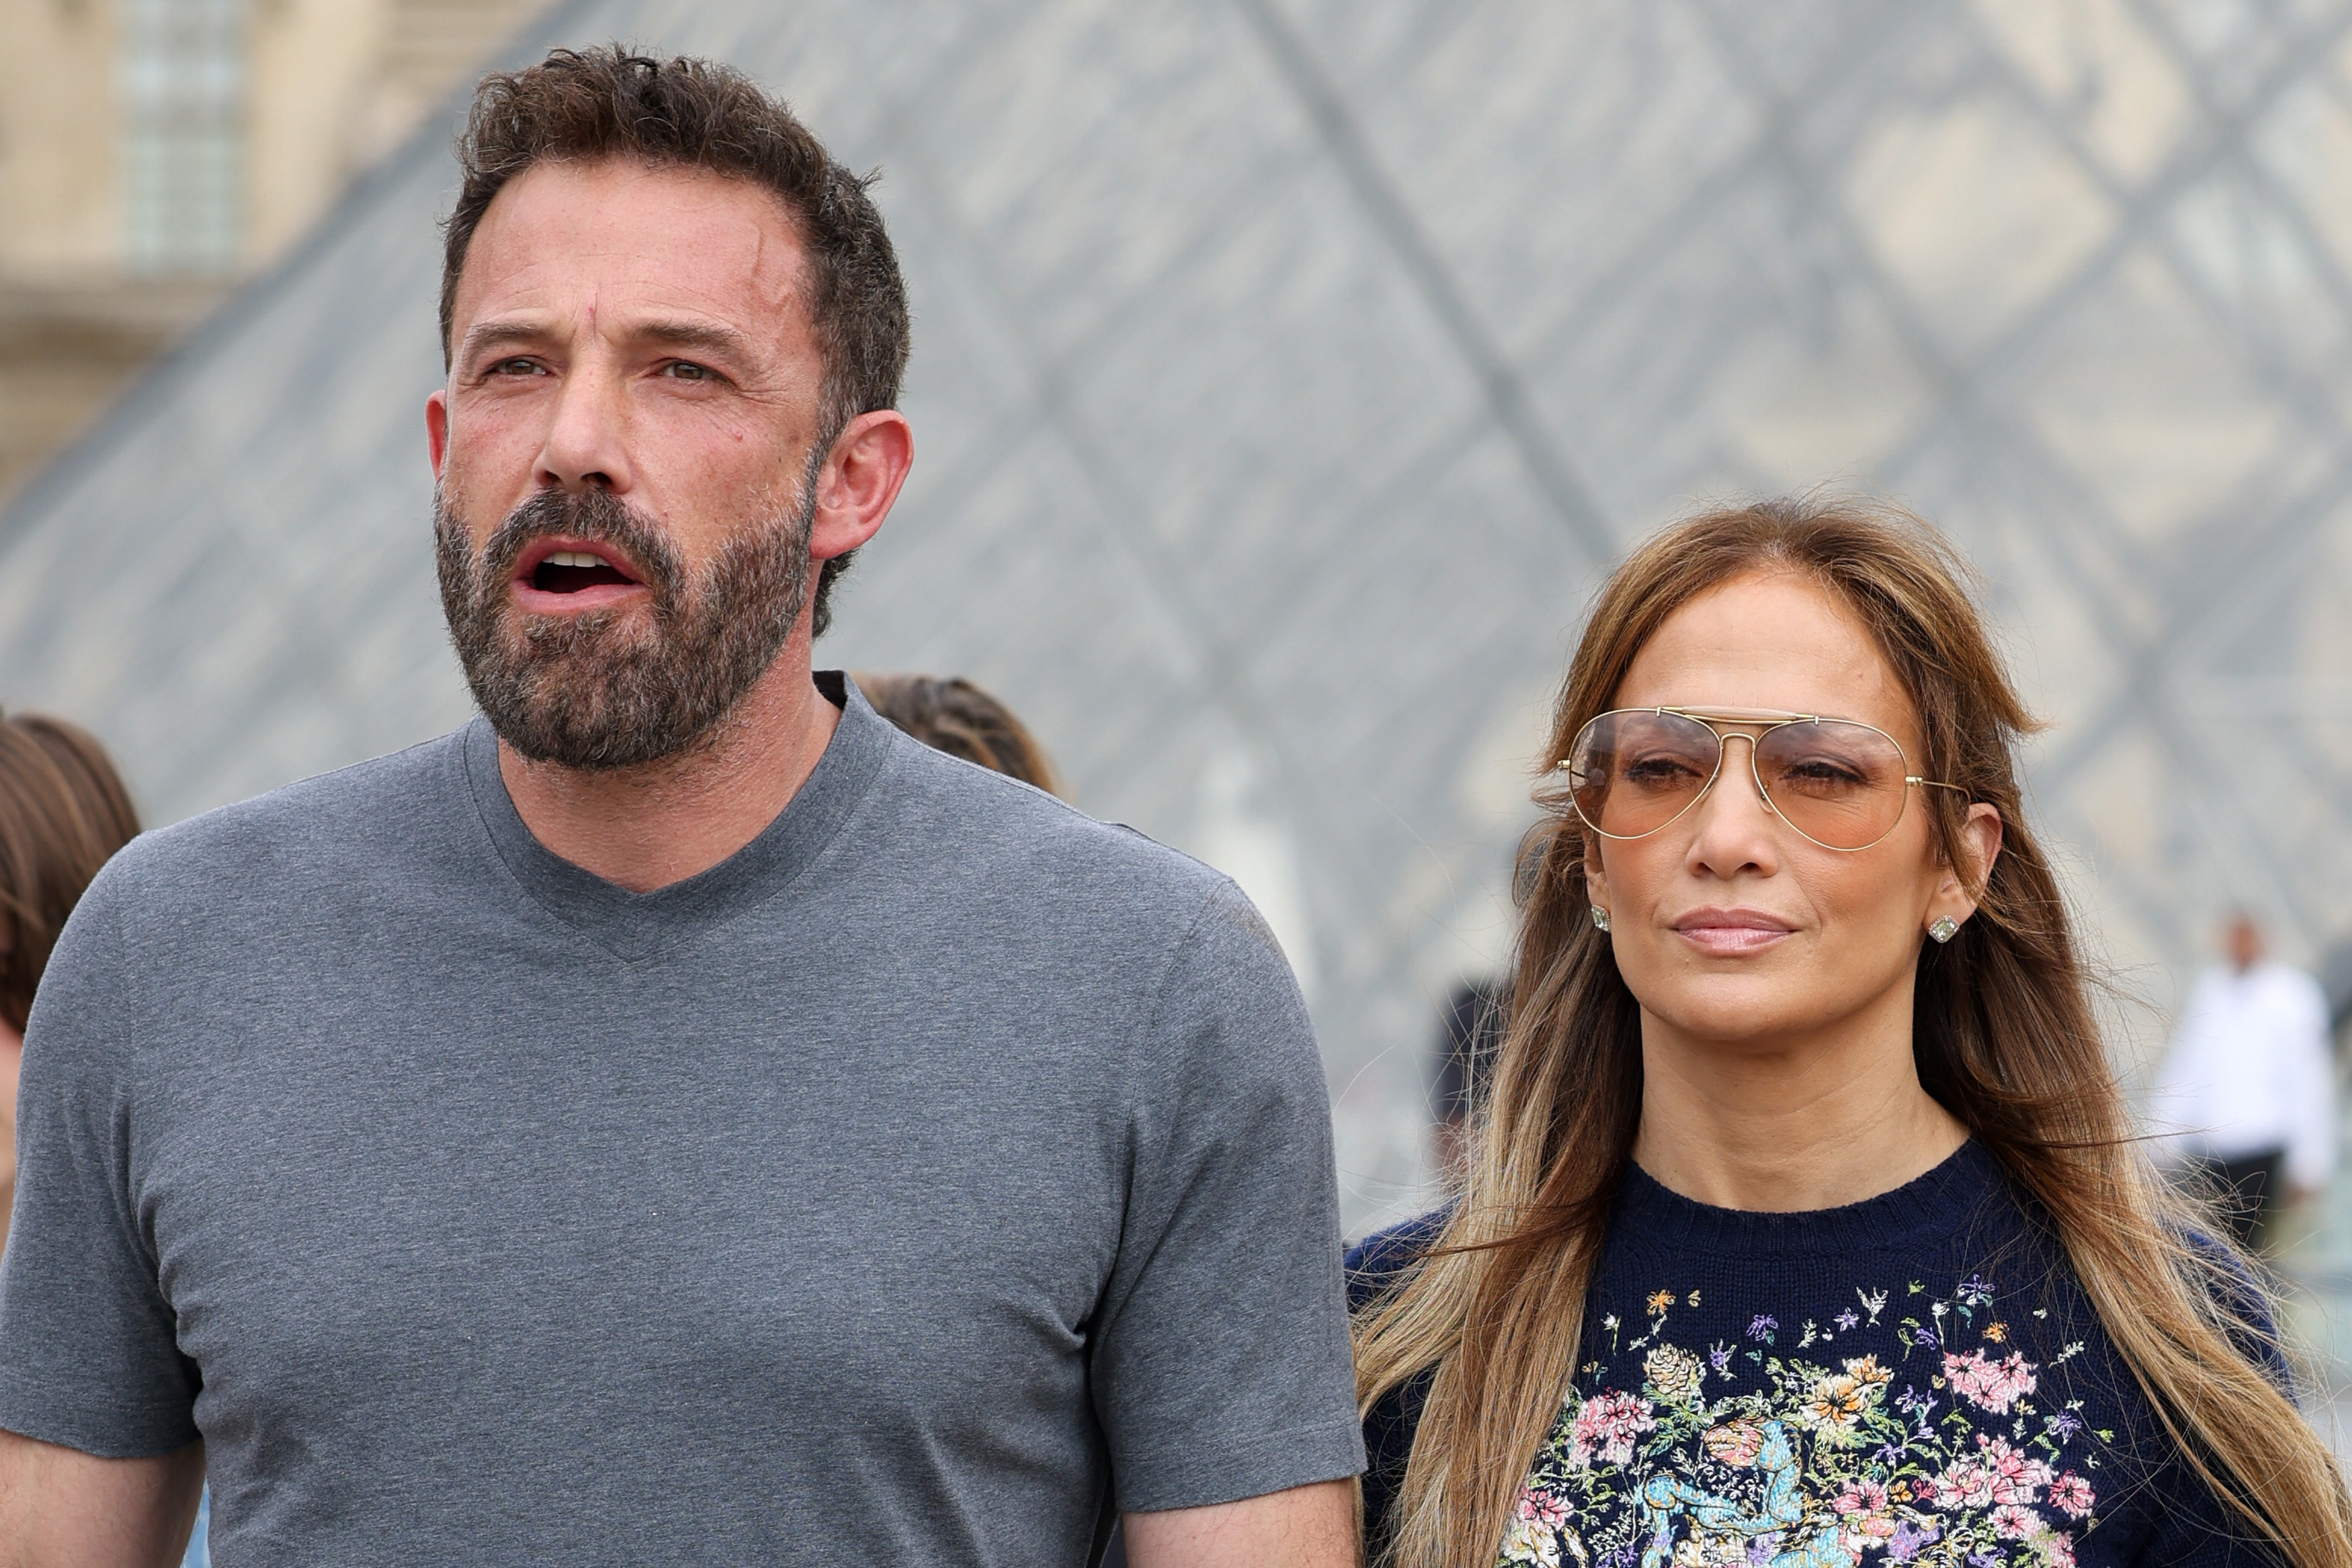 Ben Affleck and Jennifer Lopez at the Louvre Museum in Paris on July 26, 2022. | Source: Getty Images